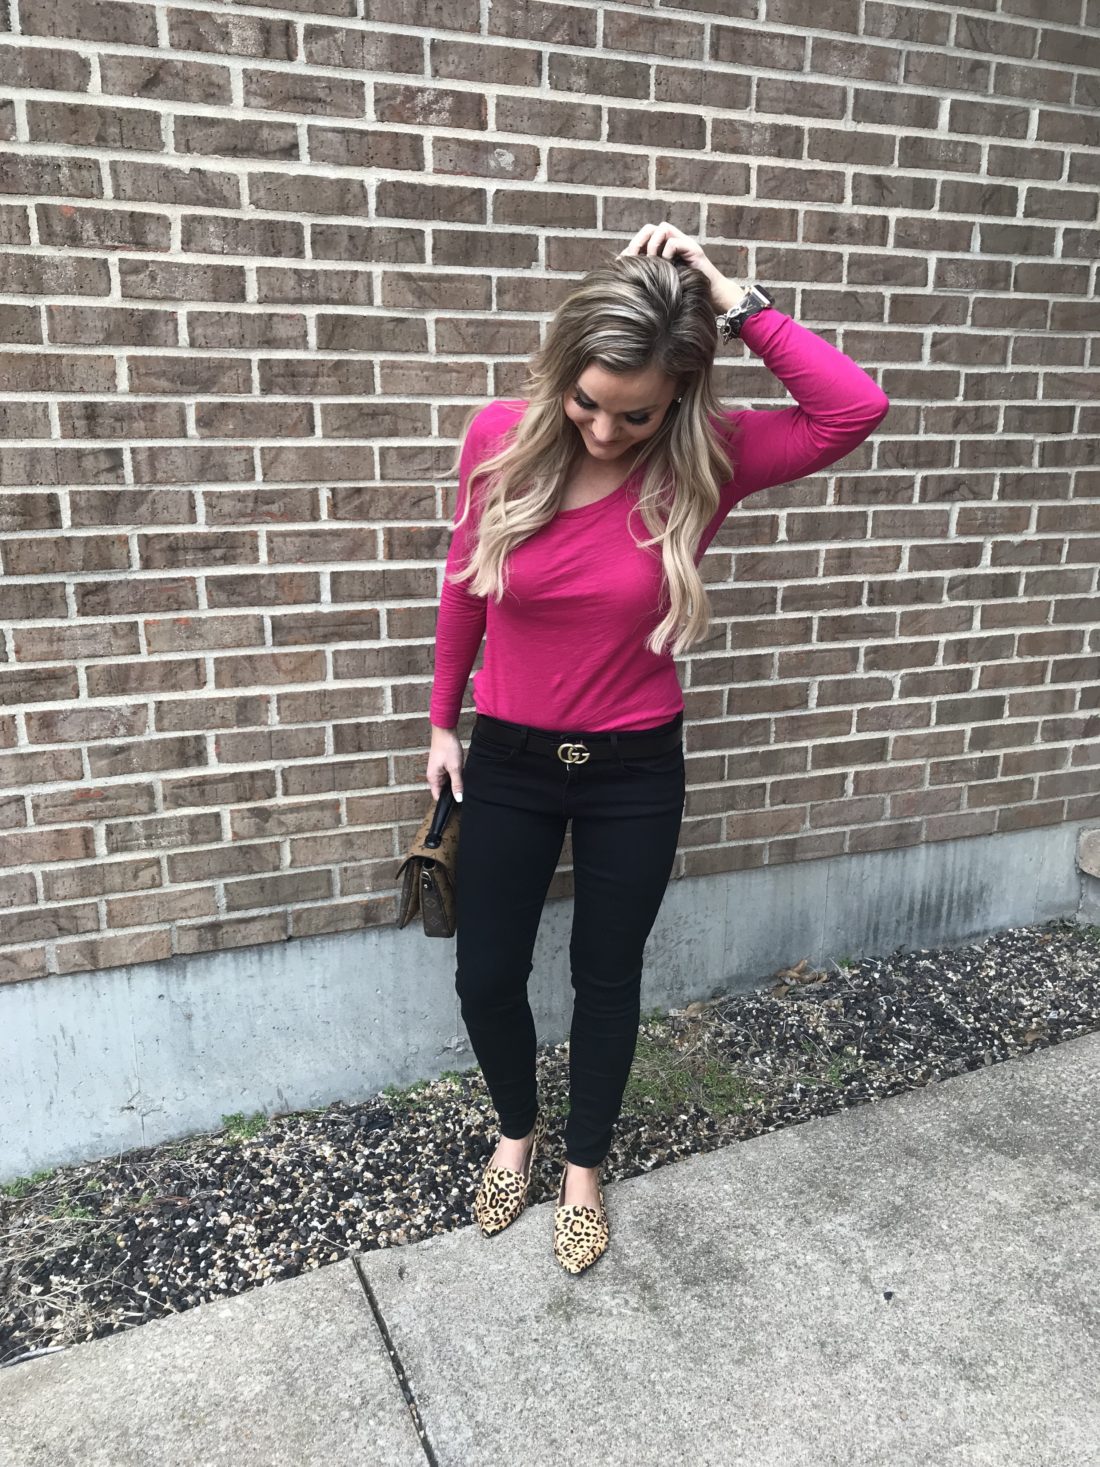 Casual outfit for spring. Hot Pink Tee, black jeans with leopard flats.